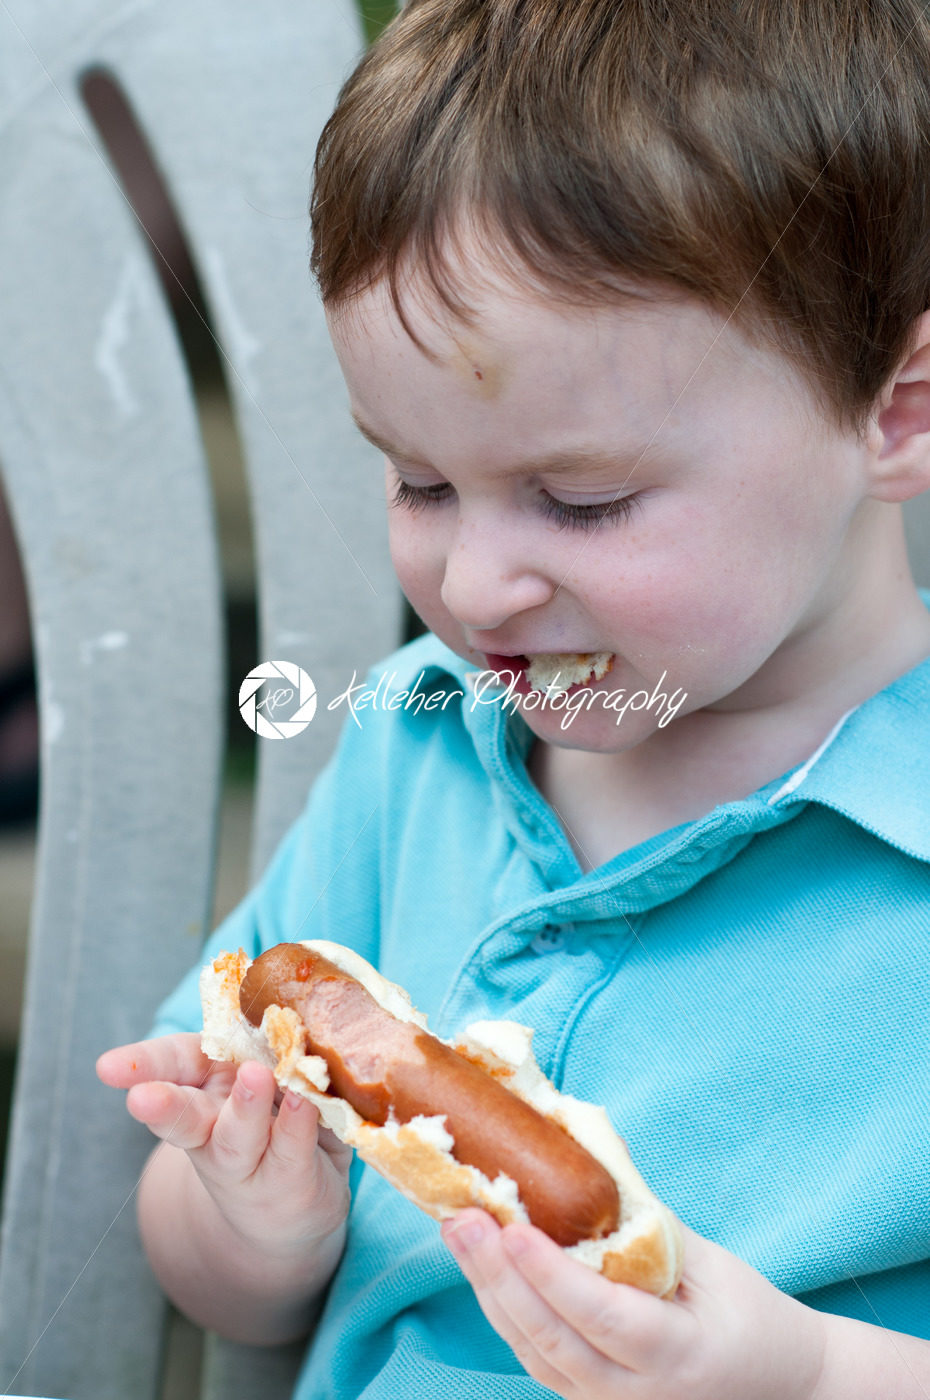 Young boy outside eating a big hot dog - Kelleher Photography Store